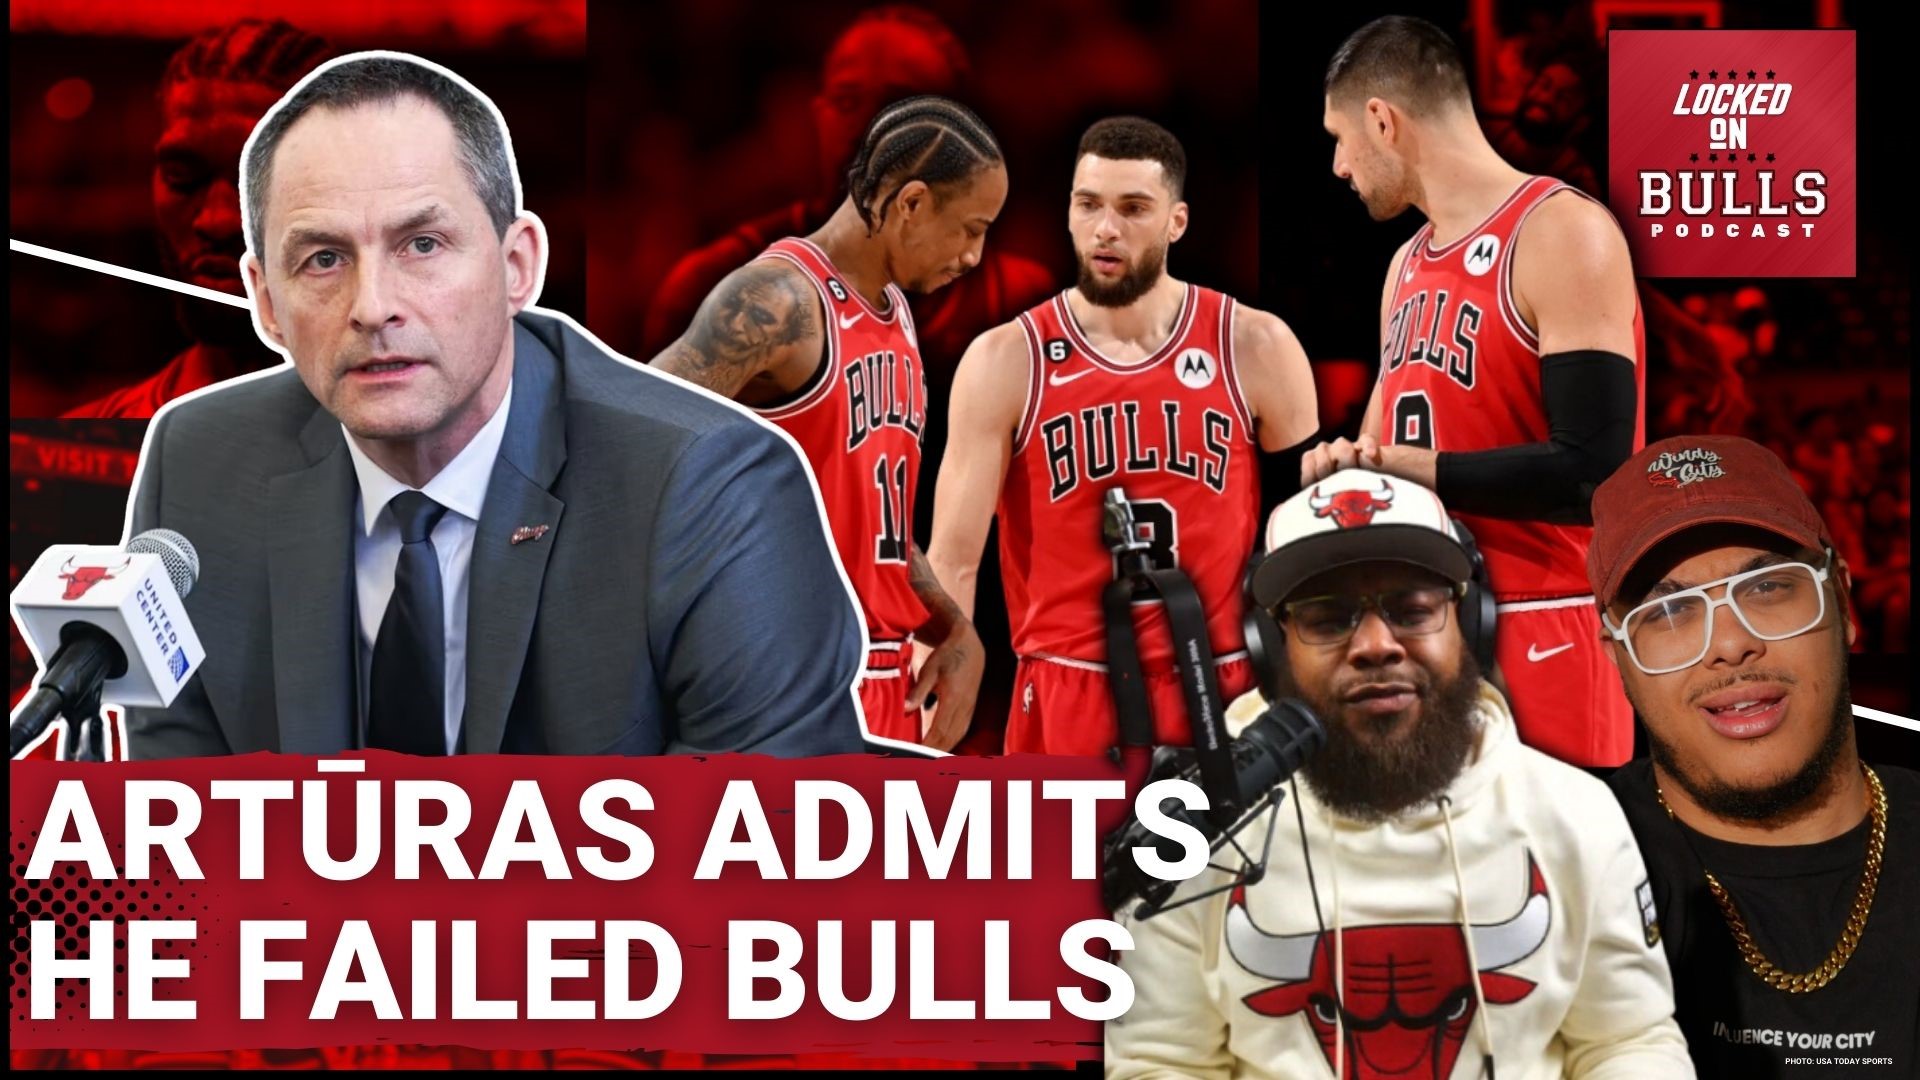 Haize & Pat The Designer react to the season ending press conference from Bulls president Arturas Karnisovas and what it may mean for the offseason. The guys also lo